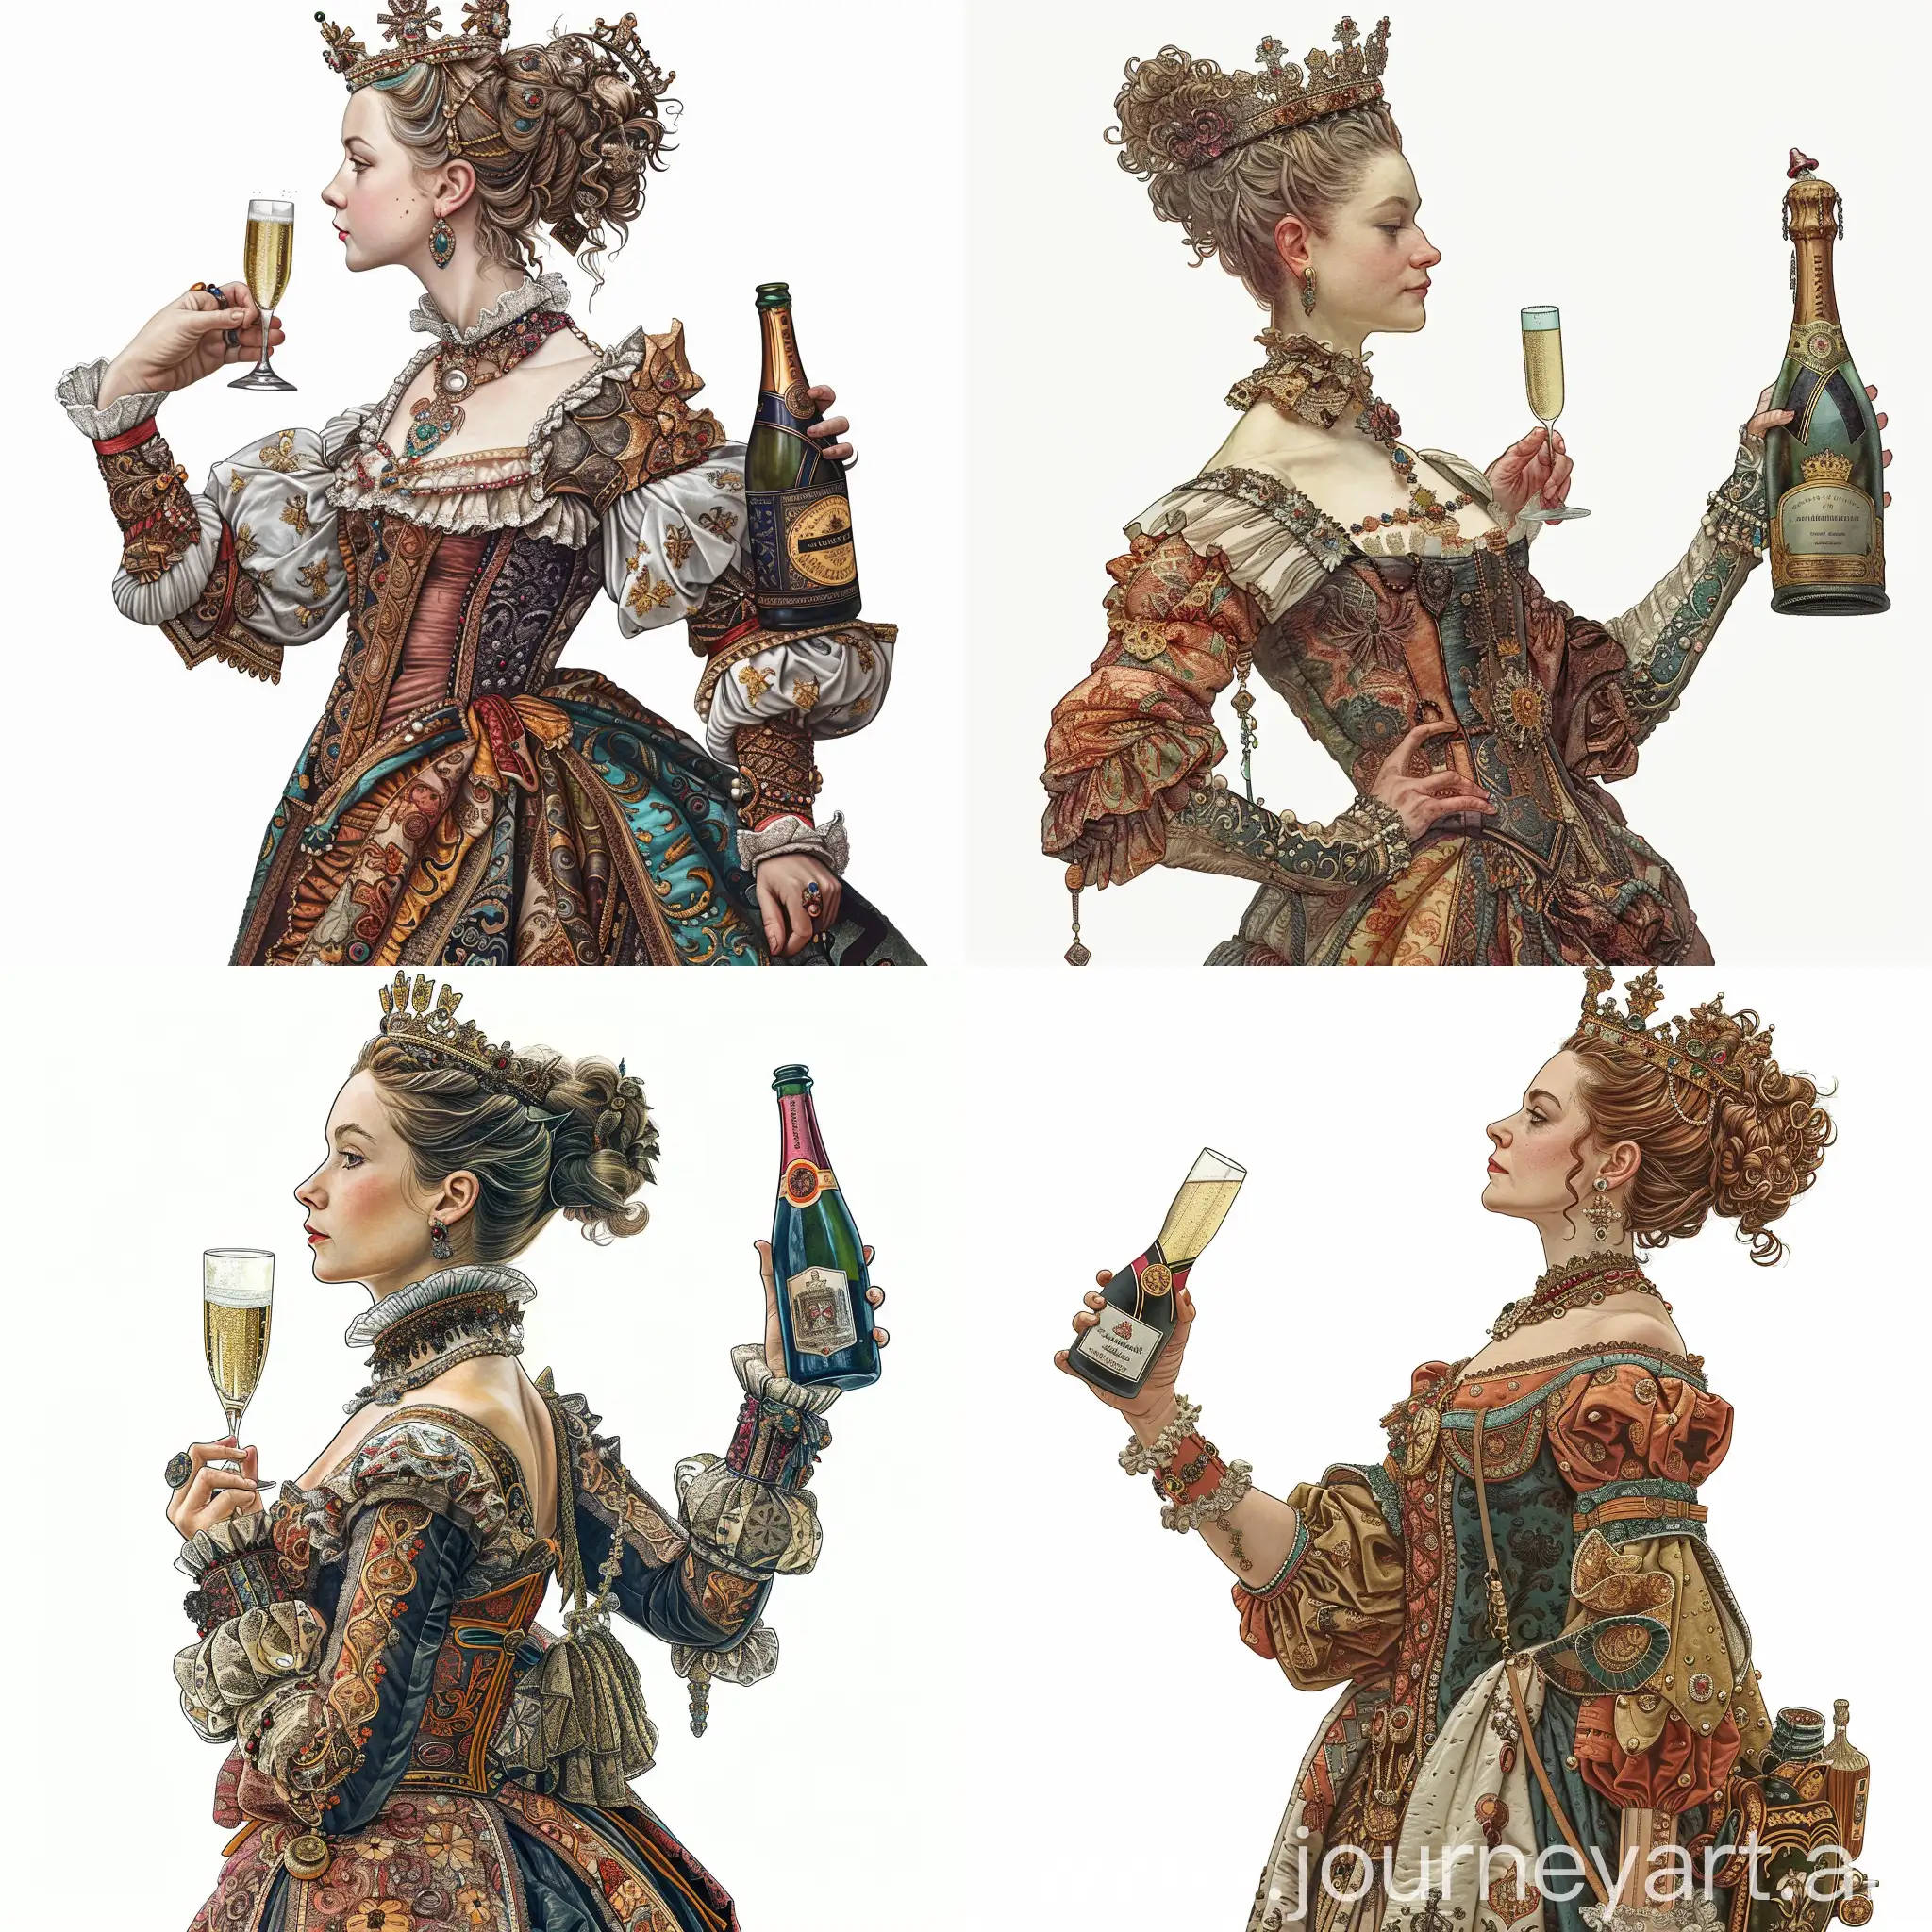 The queen of ancient France in profile, waist-high portrait, with a crown on her head, looking straight, in antique ornate, exquisite clothes, holding a glass glass with champagne at chin level, the other arm bent at the elbow and holding a bottle, complex colors, illustration, on a white background, Arthur Wrexham style